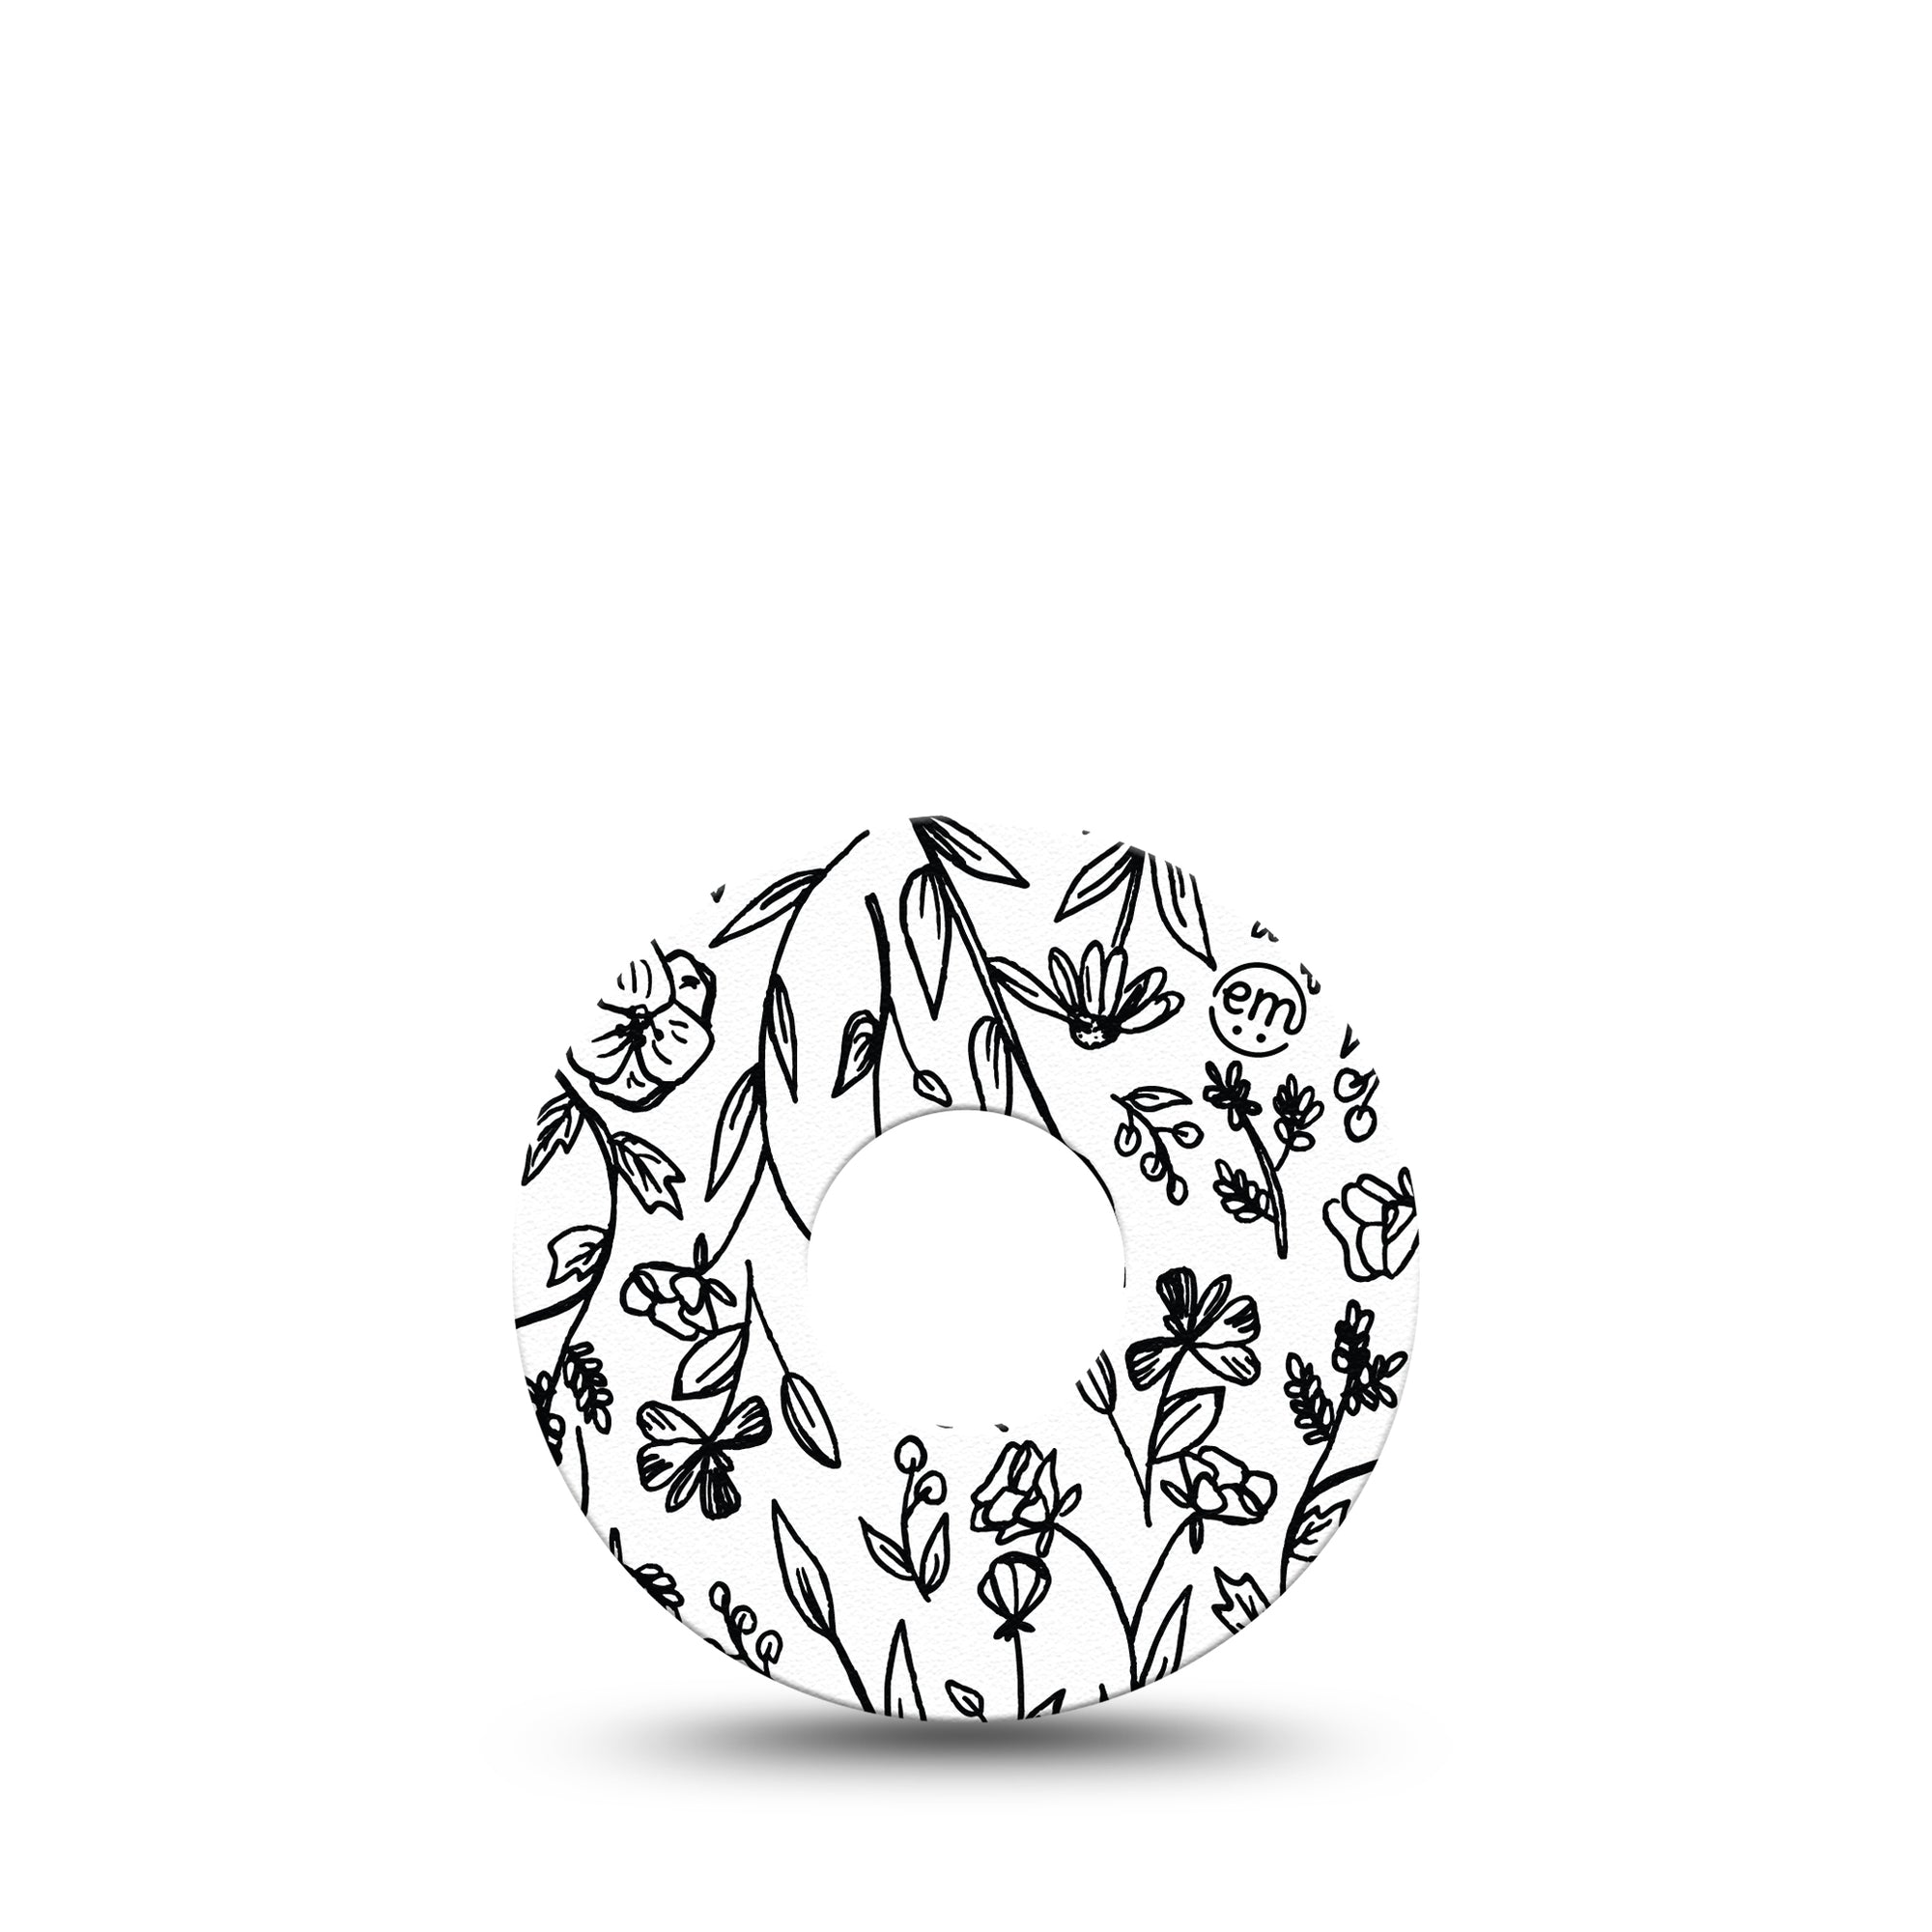 Custom Black and White Floral Libre 3 Tape, Single, Colorless Flowers CGM Adhesive Patch Design